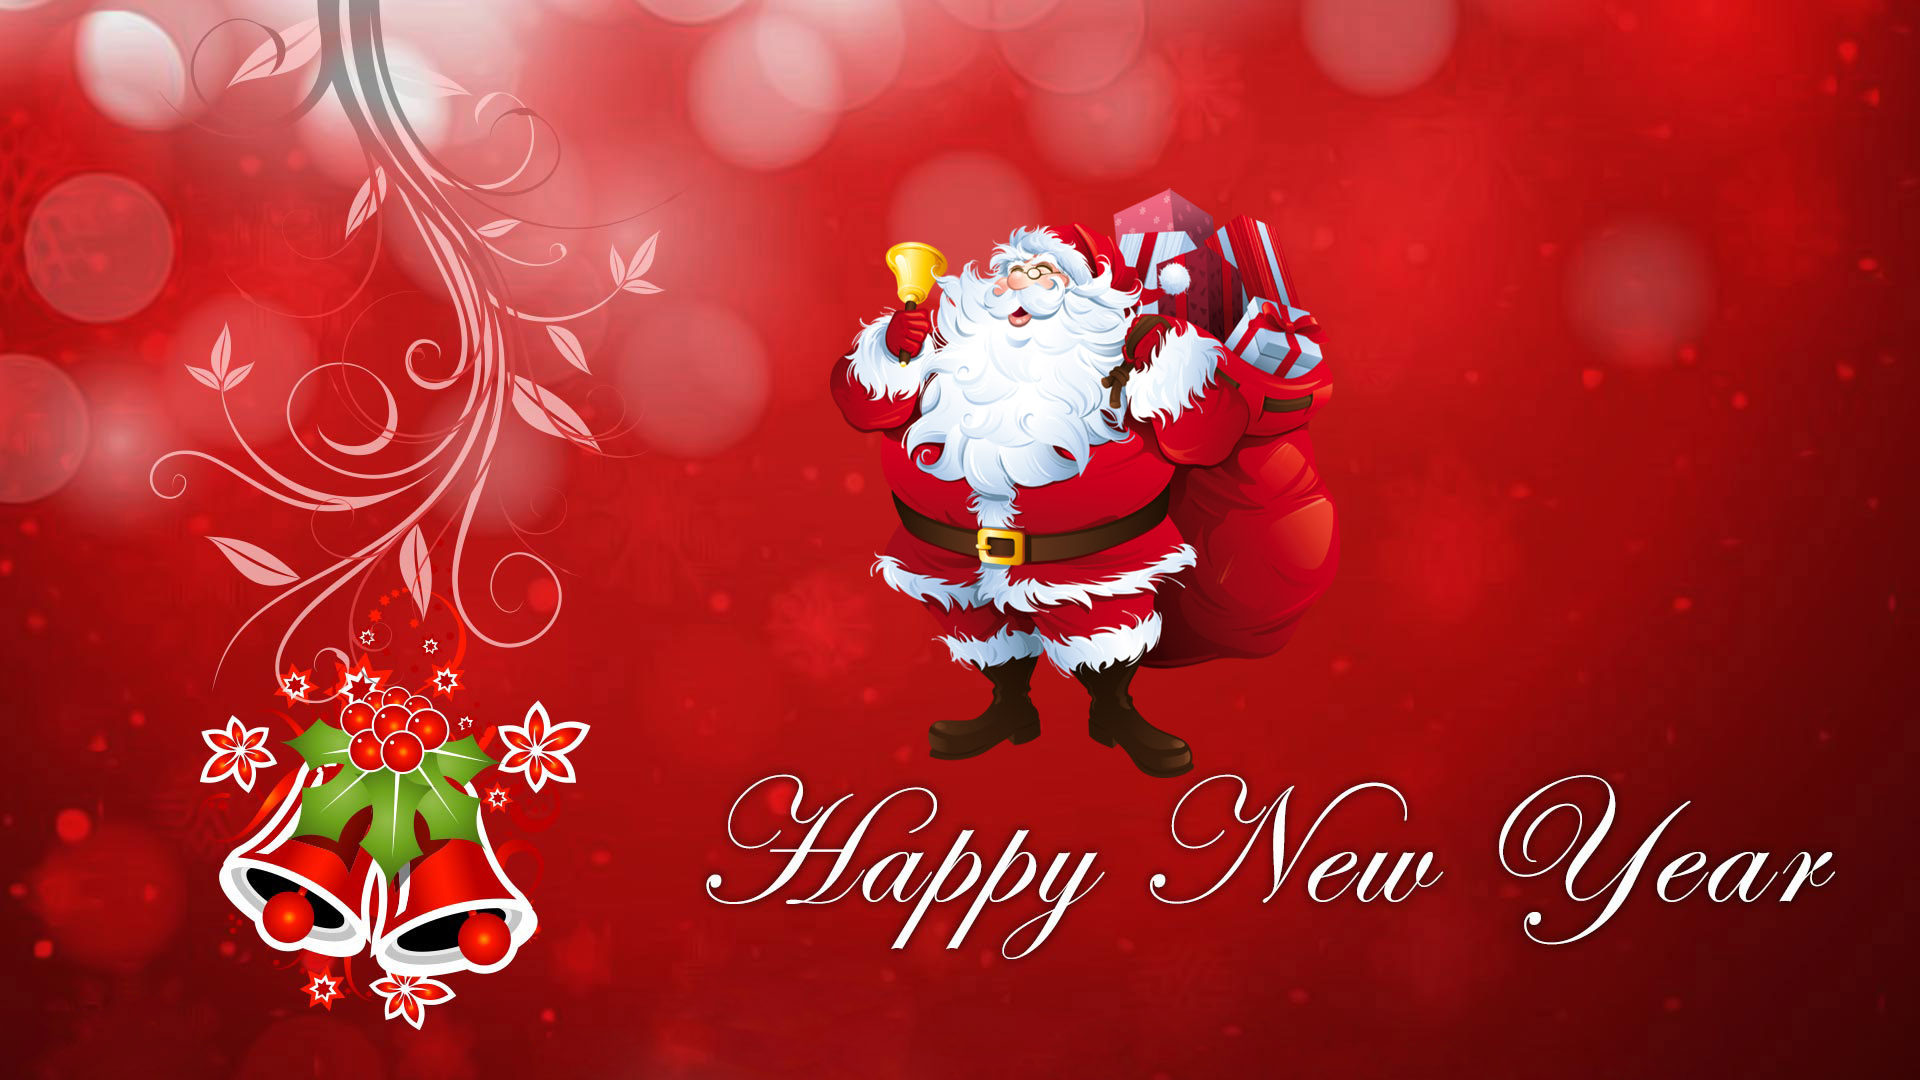 Download Free New Years Santa Claus Hd Wallpapers